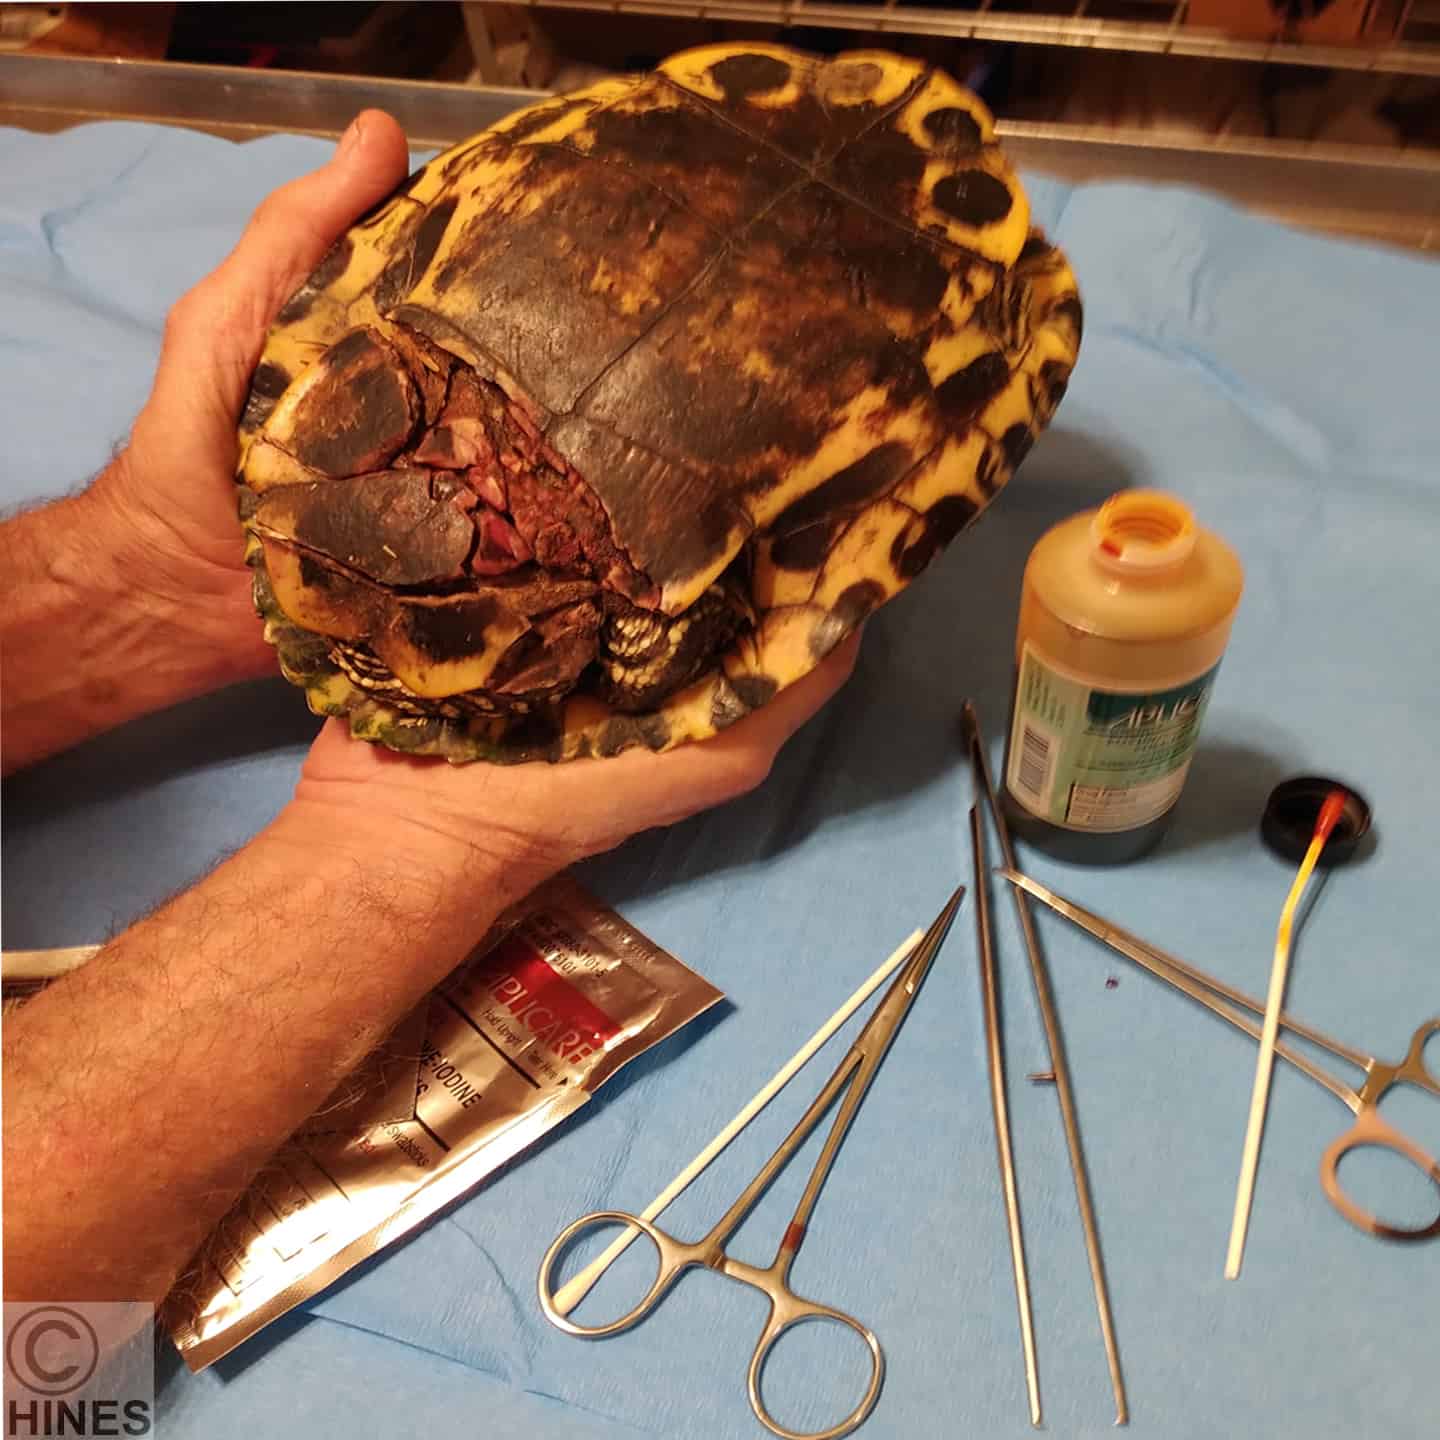 https://vetspace.2ndchance.info/wp-content/uploads/2023/02/Complex-Turtle-Tortoise-Shell-Repair-image-1-compressed.jpg